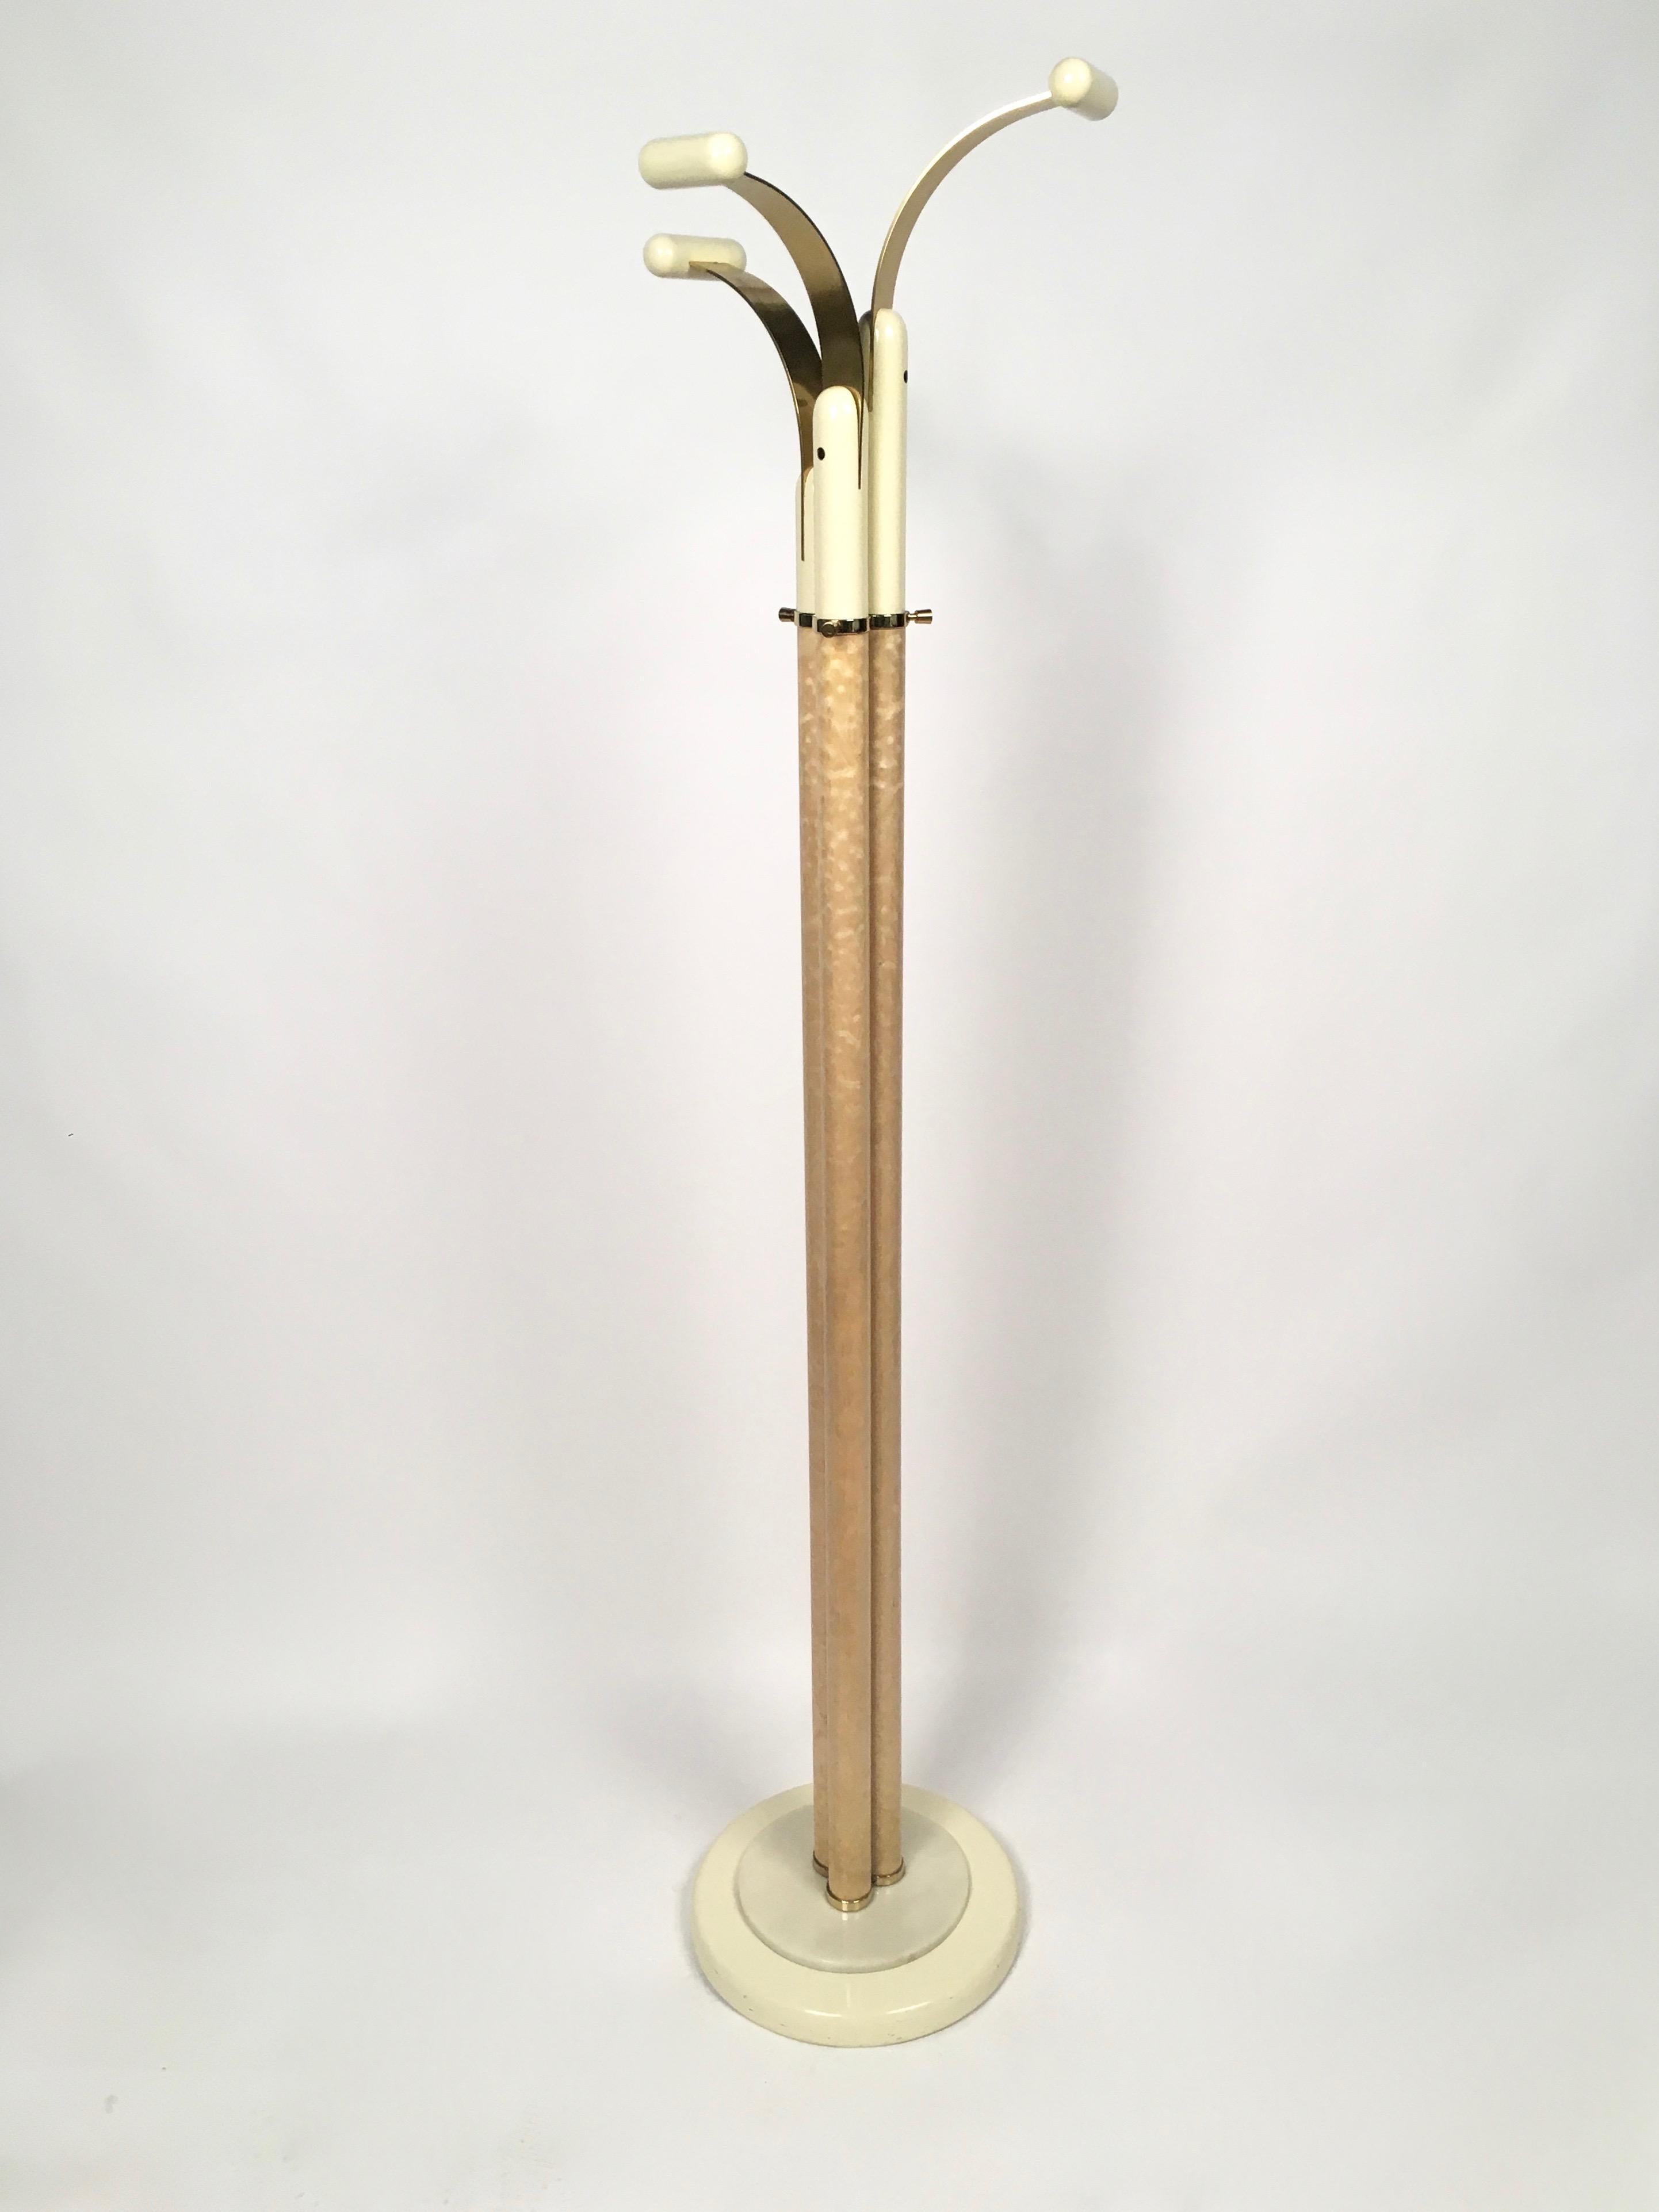 Fabulous Italian coat hanger in Mid-Century Modern style, with three adjustable arms in lacquered wood and brass.